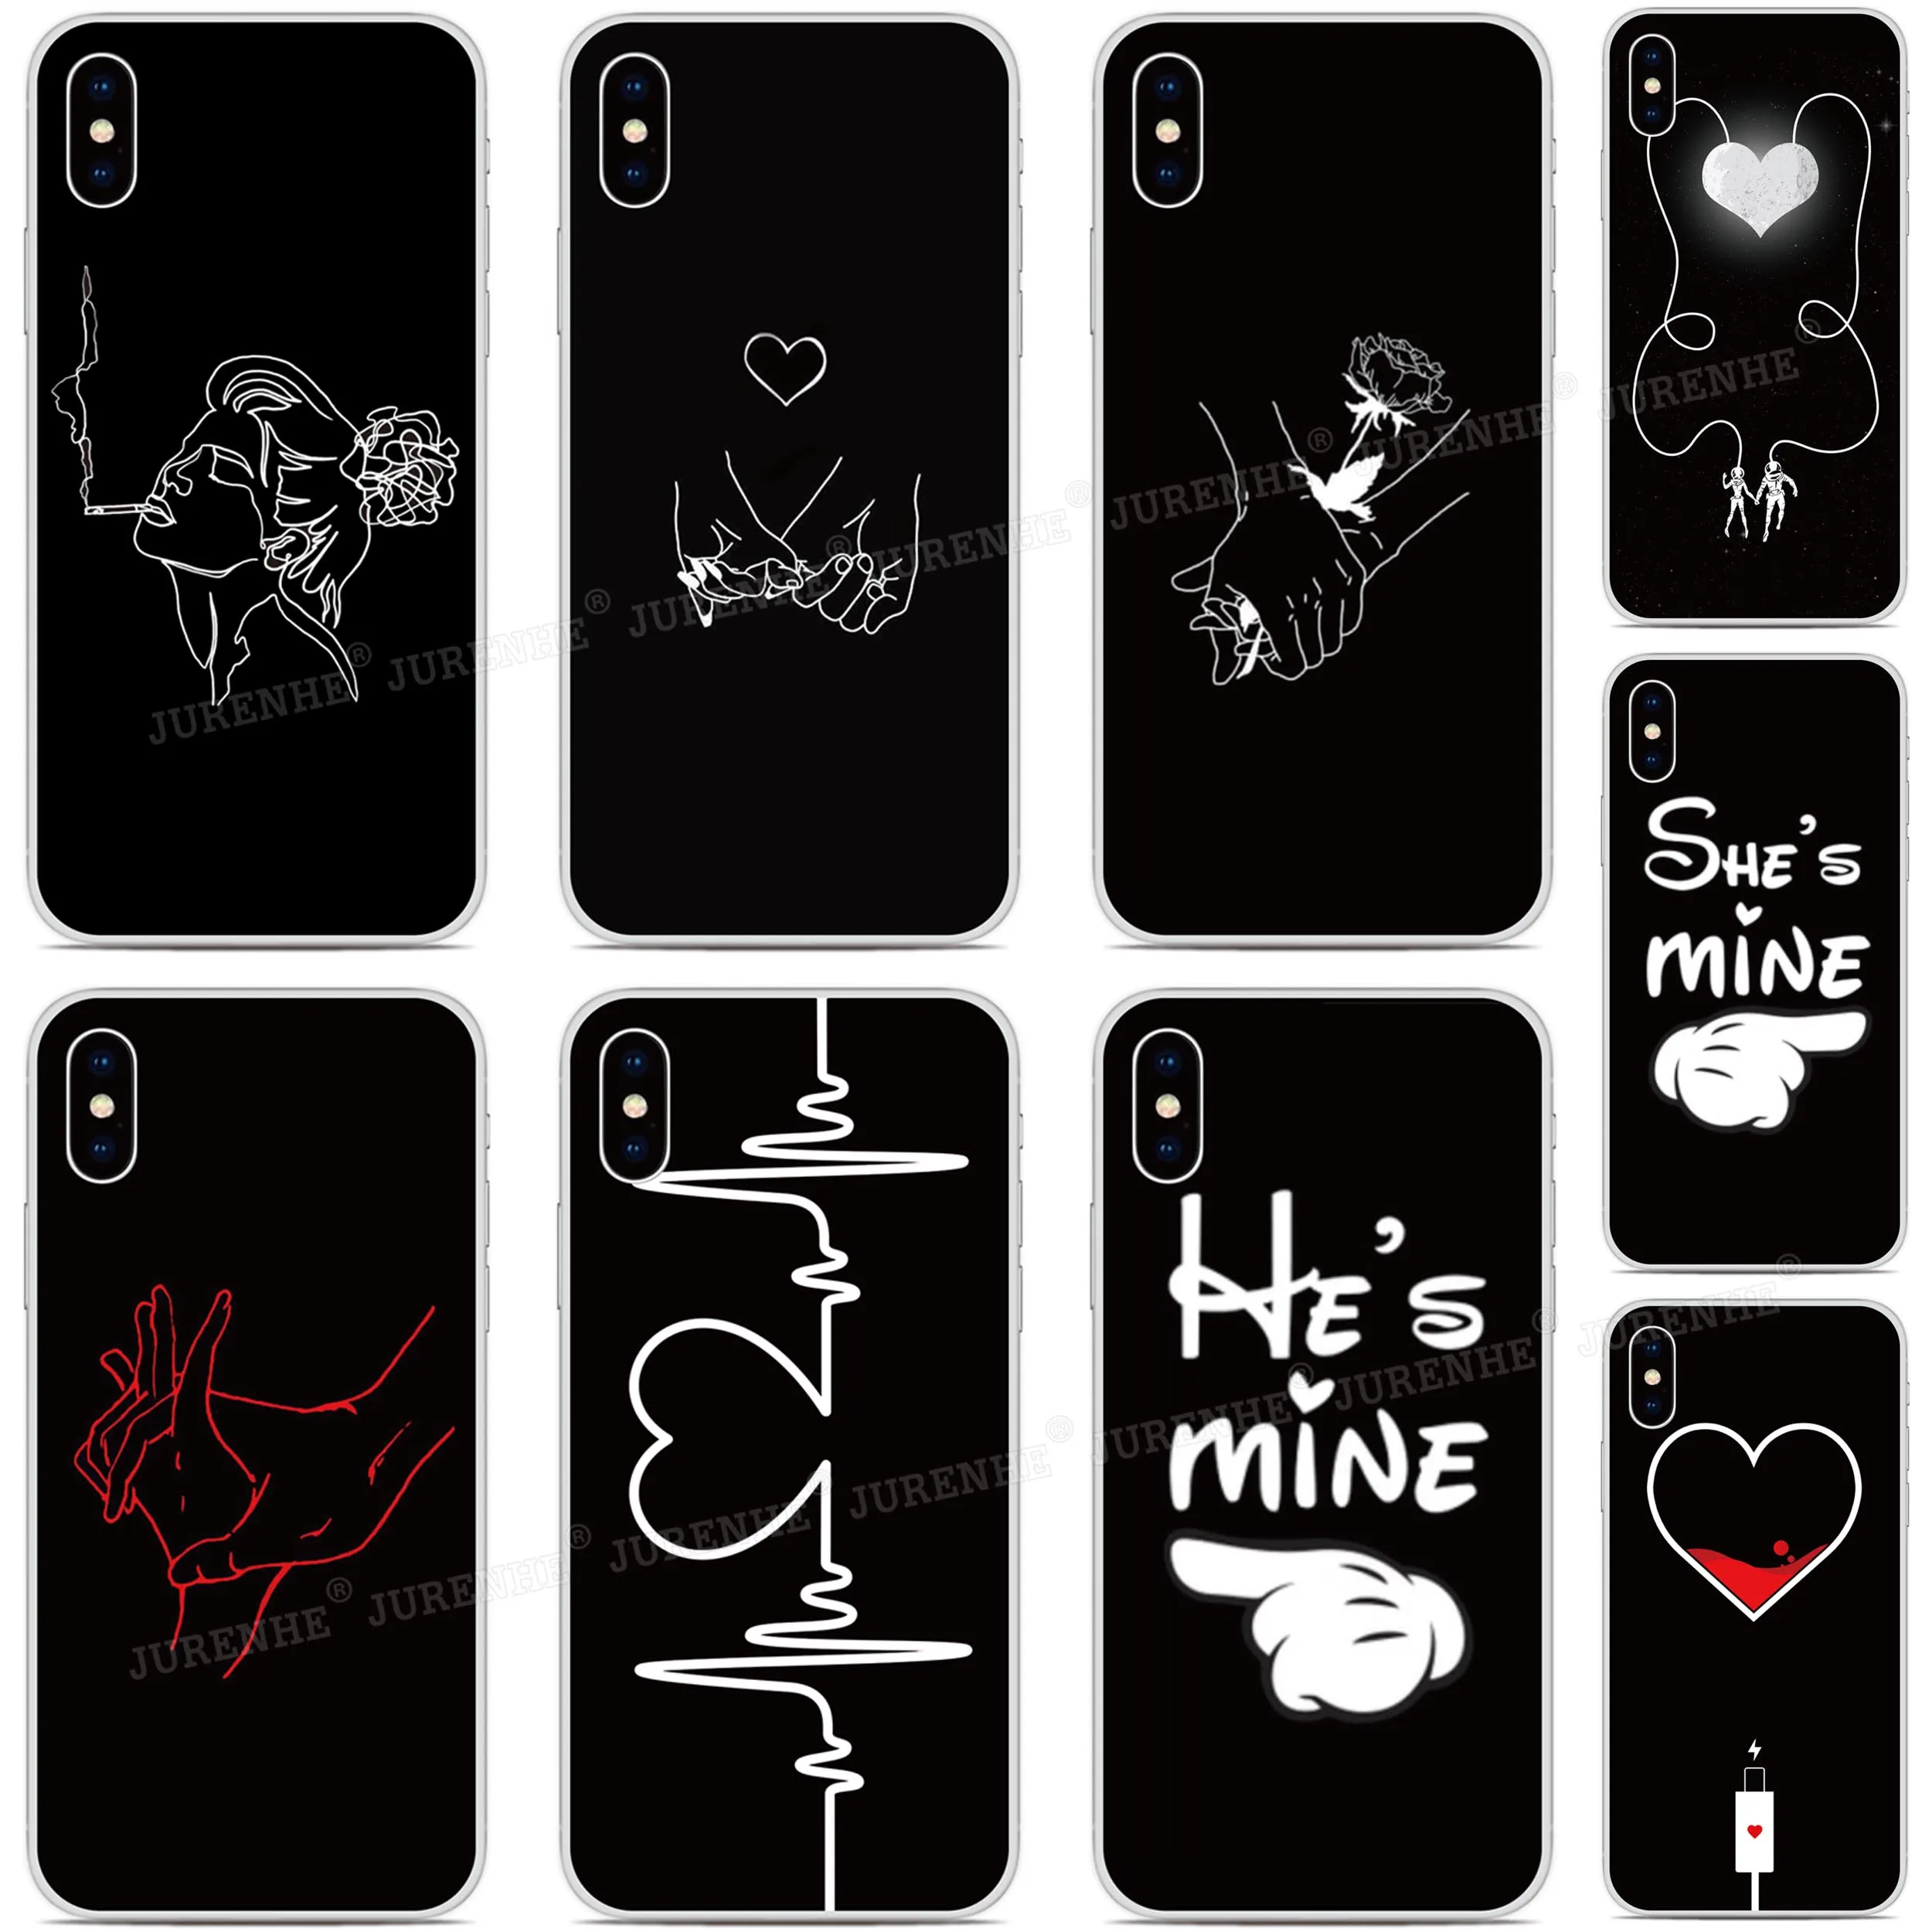 

Couple Love Cover For Umidigi Bison GT X10 A11S A7S F2 F1 Play A3X A3S A5 A3 A7 S5 A9 A11 Pro Max Power 3 5 5S Phone Case